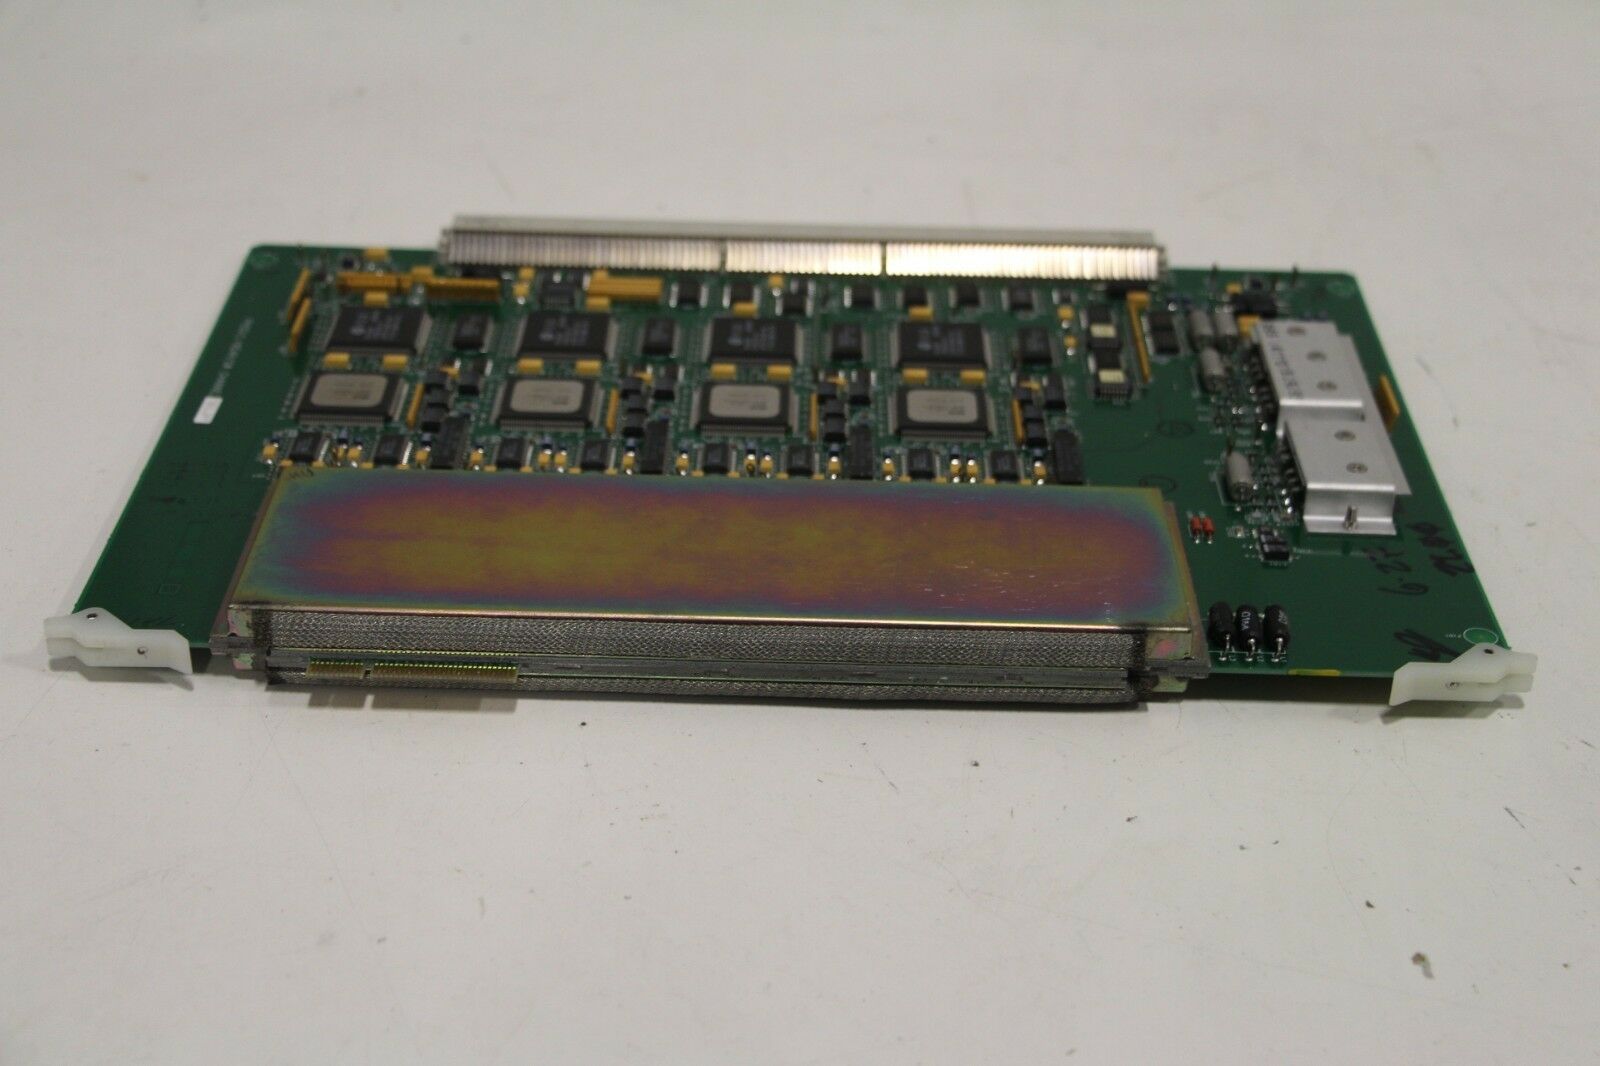 Philips ATL HDI-3000 Ultrasound D2852 7500-0819-07 PHSD Linear CW Channel  PCB As